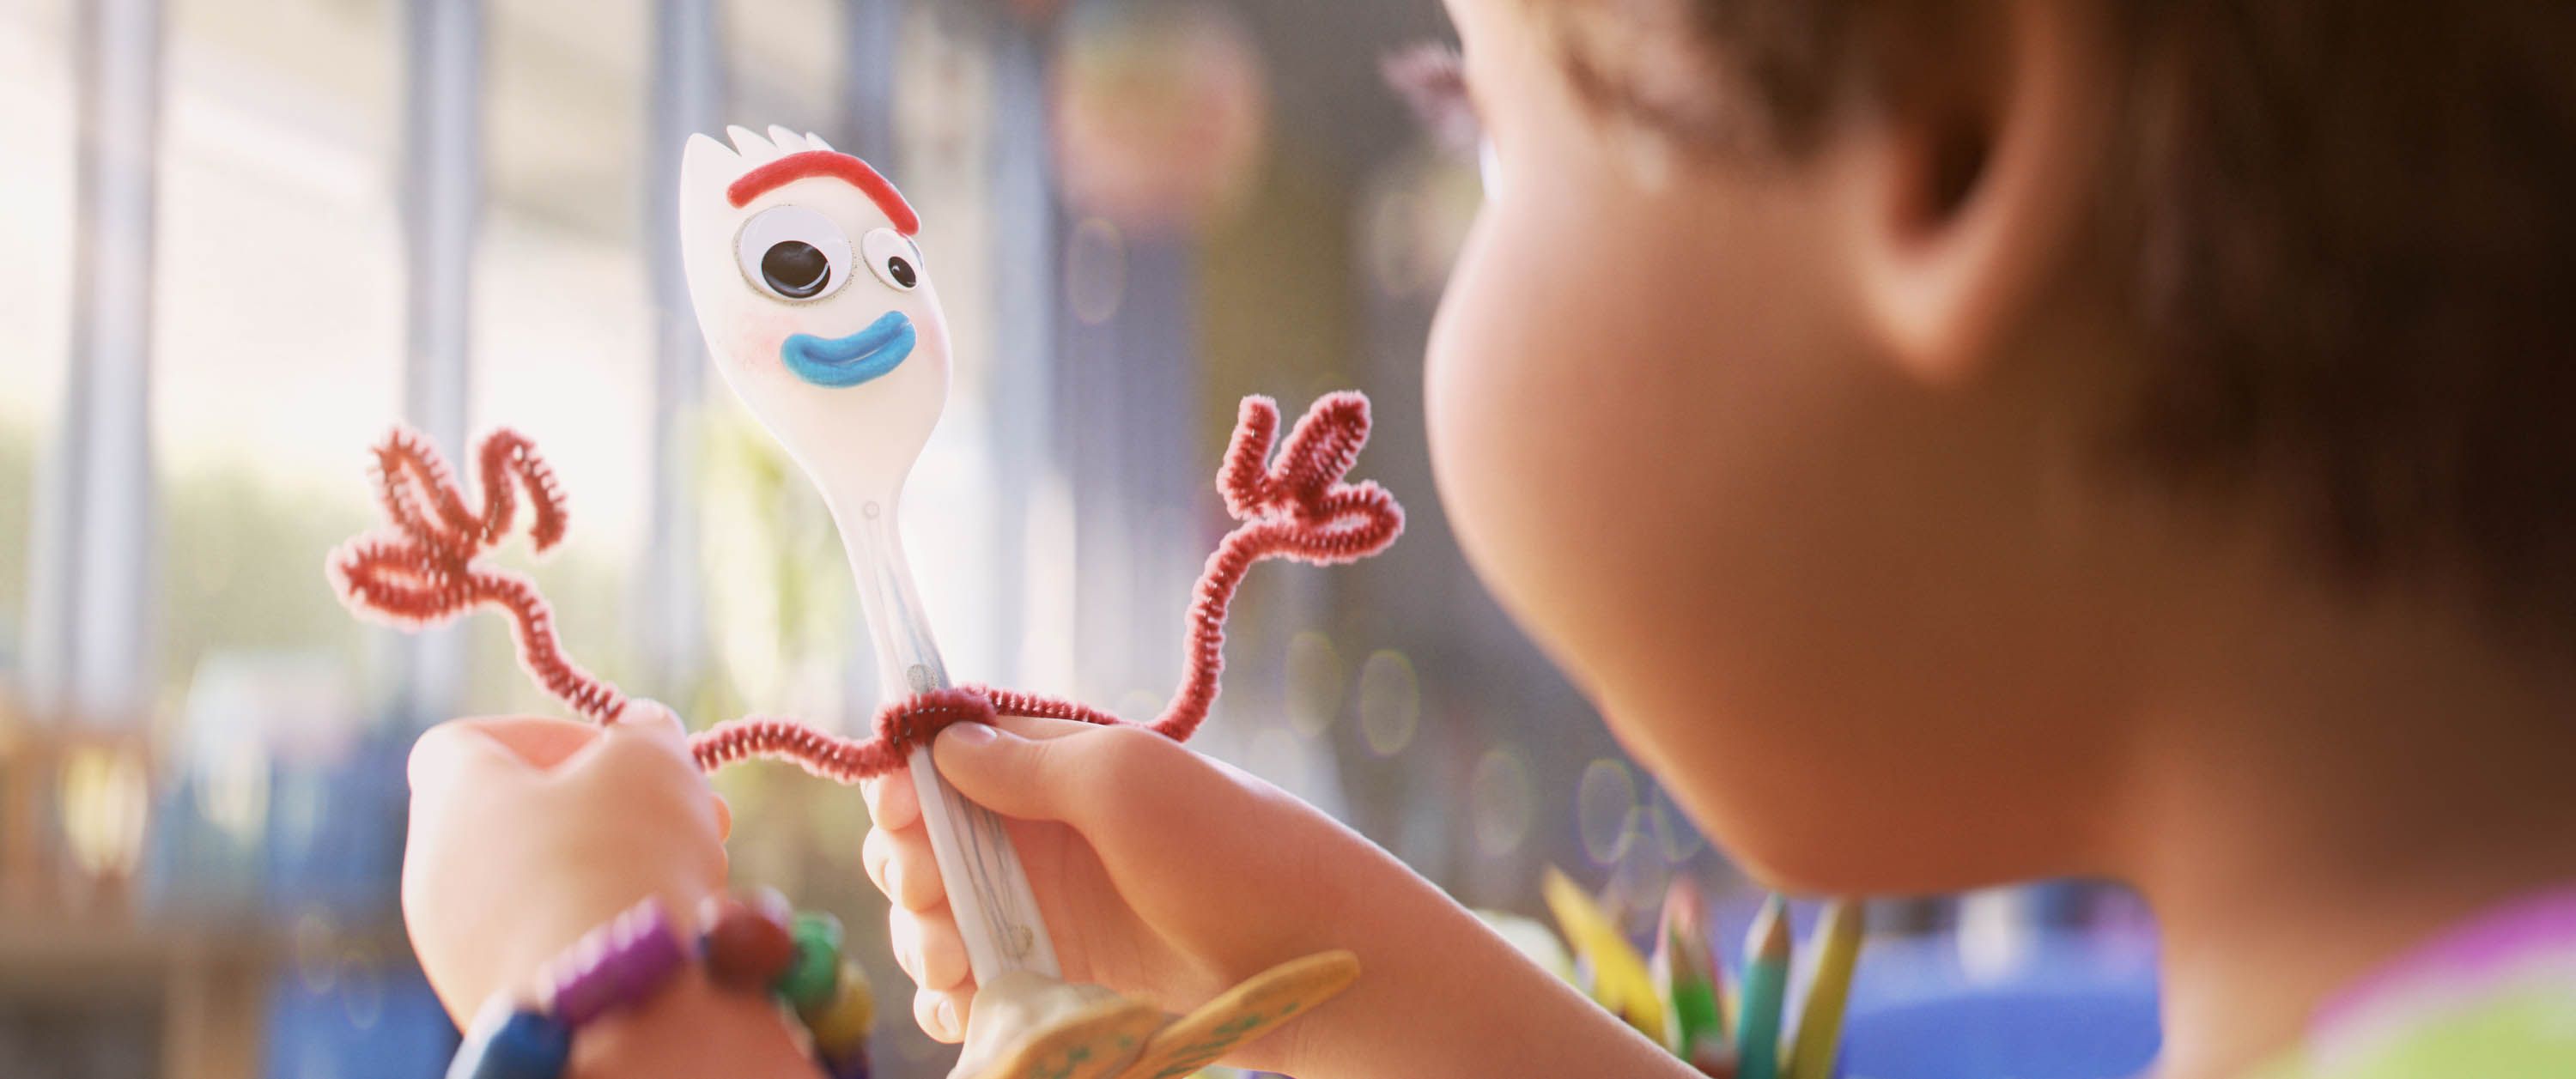 Toy Story 4' Captures How Forky and Other Characters Are Alive - Toy Story 4  Movie Review